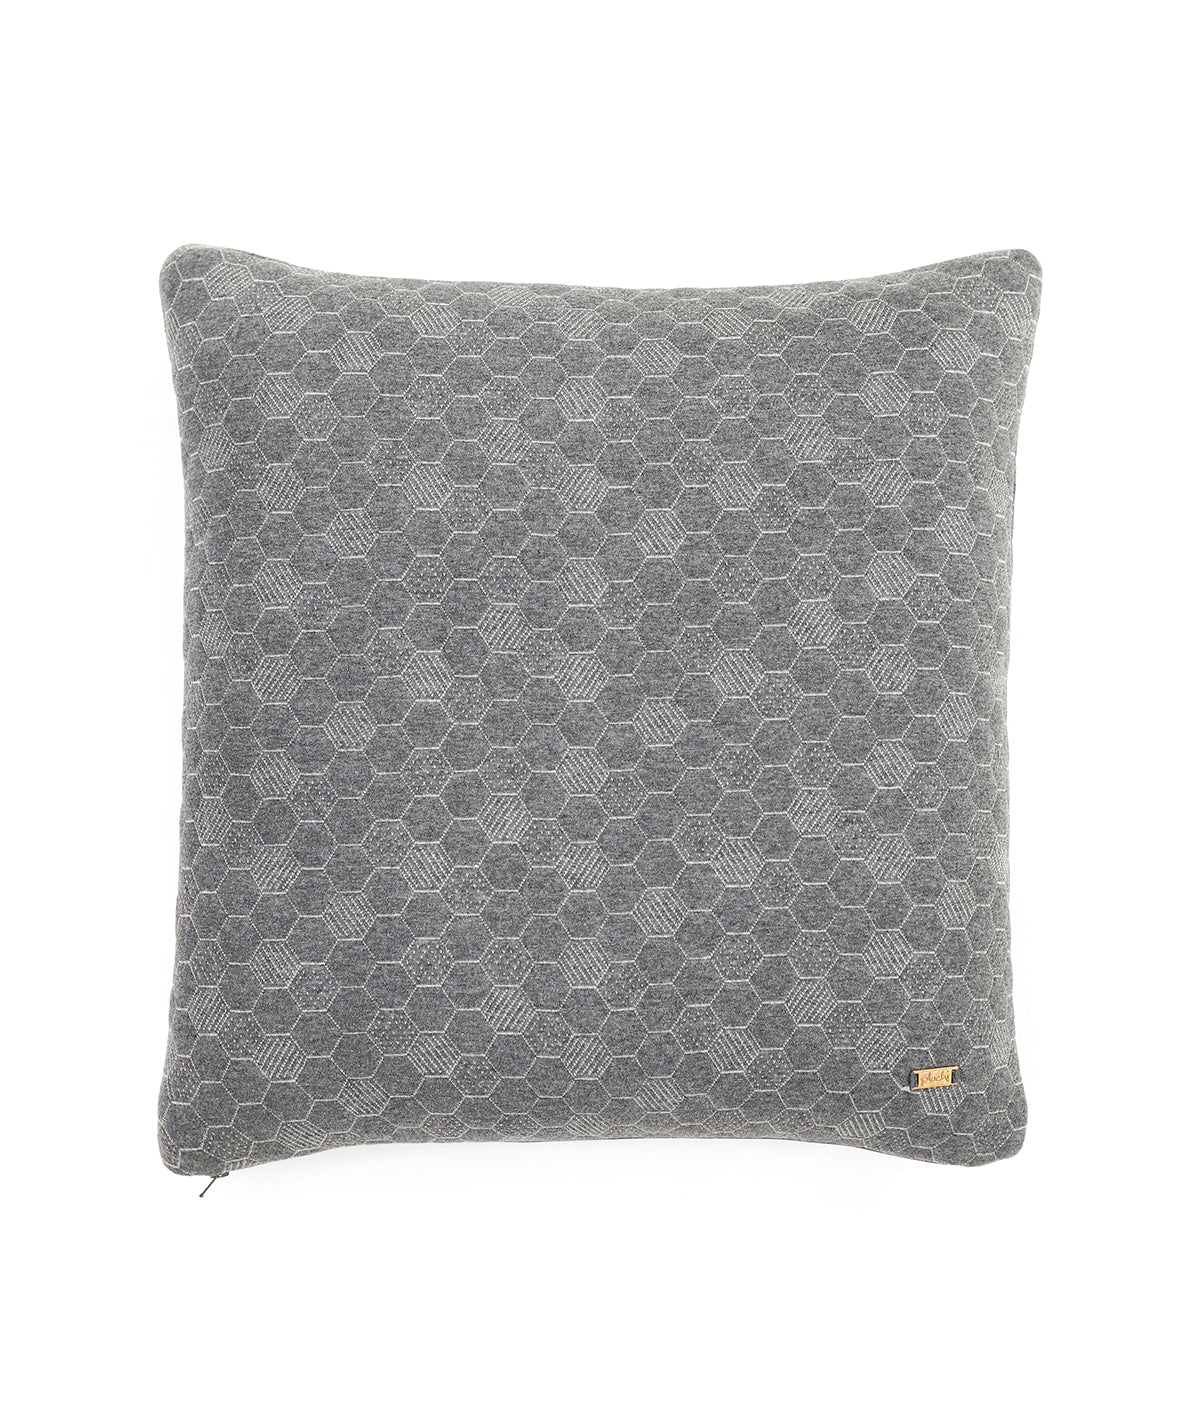 Bubbles Dark Grey Melange Quilted Cotton Knitted Decorative 18 X 18 Inches Cushion Cover